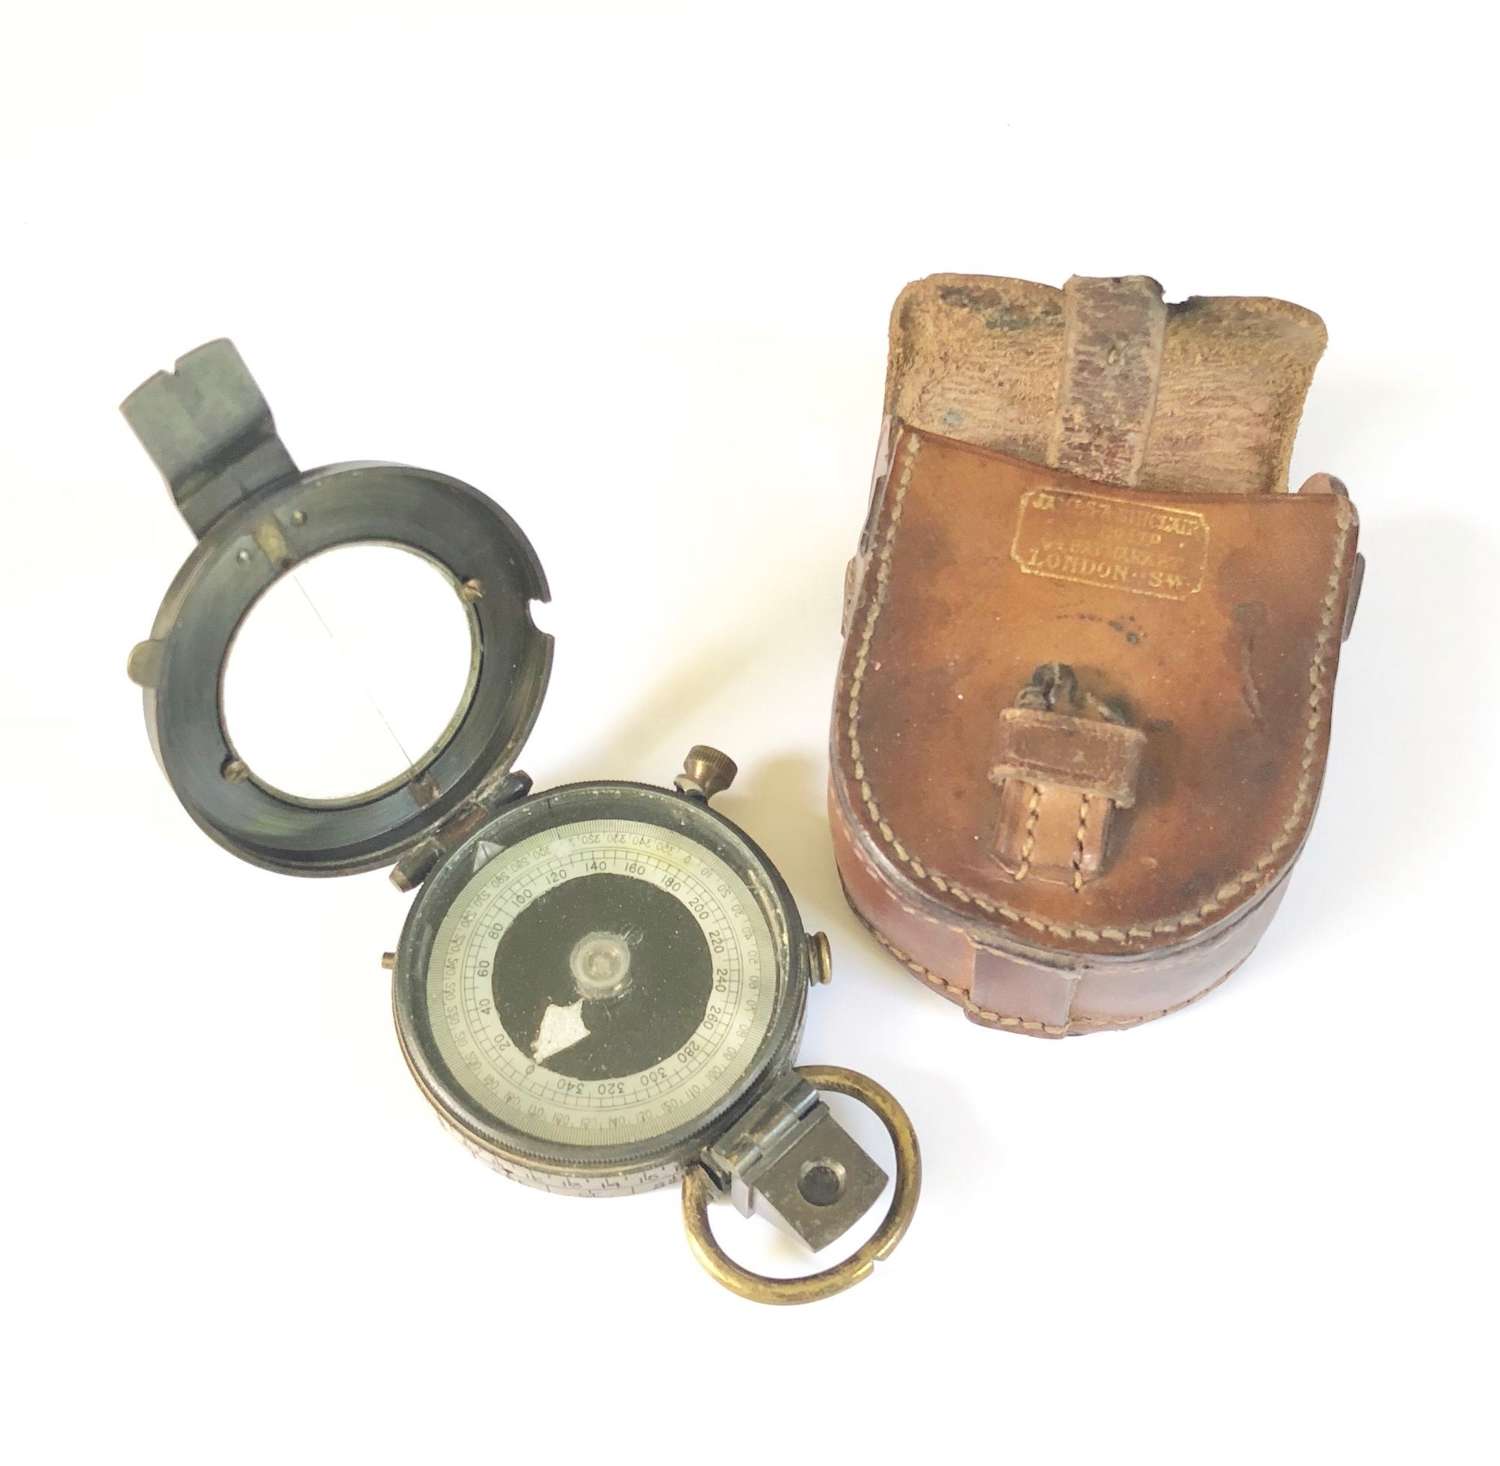 WW1 British Officer’s Marching Compass by Sinclair London.